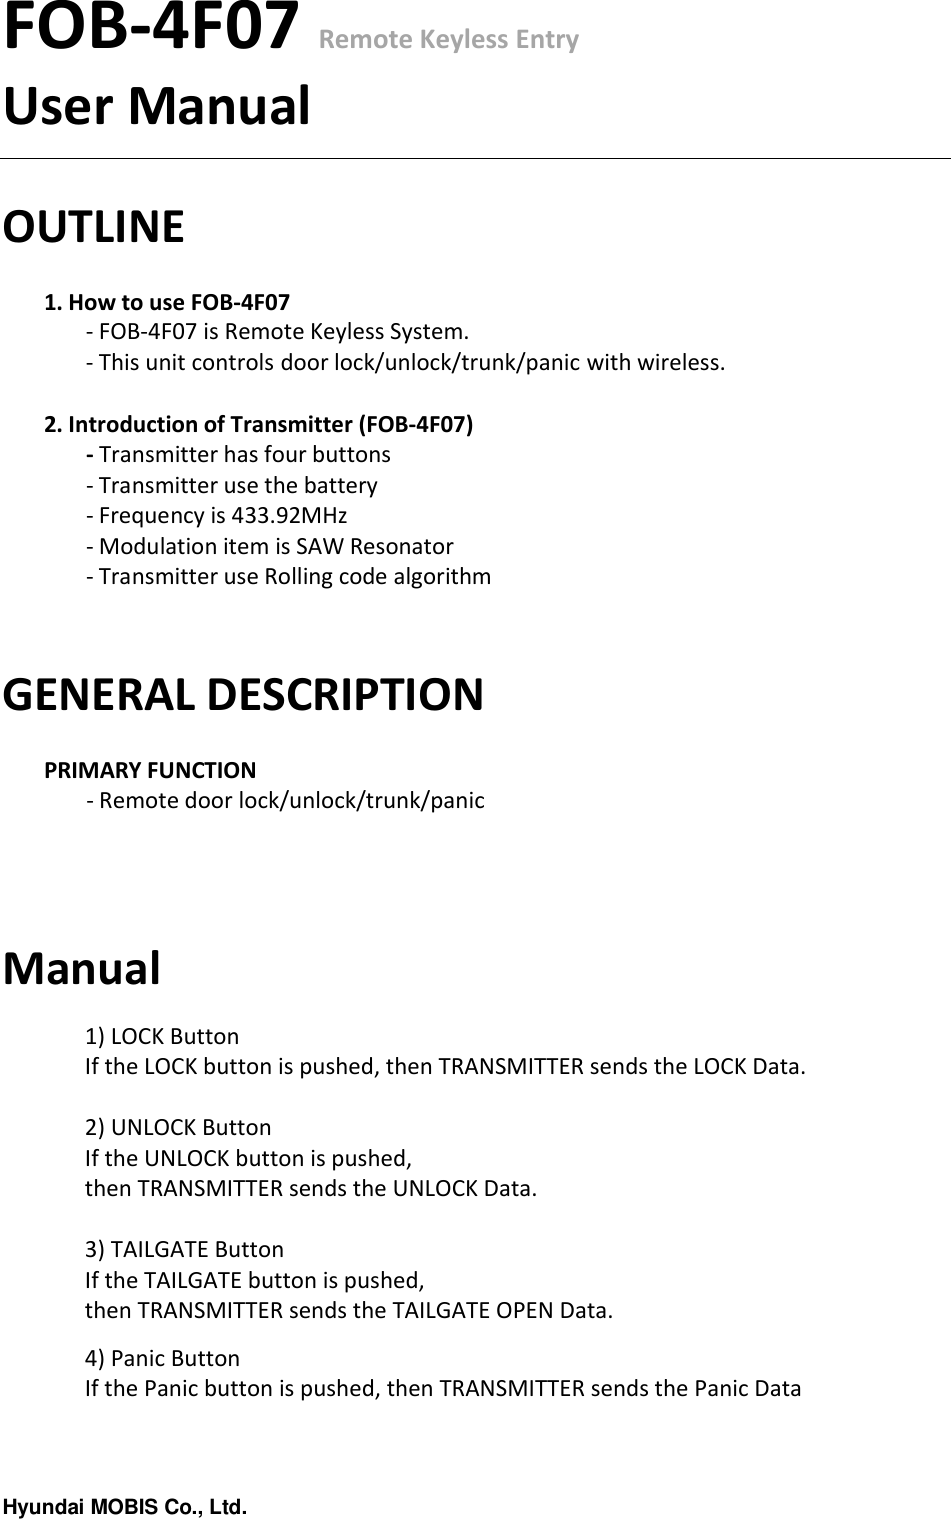 Hyundai MOBIS Co., Ltd.FOB-4F07 Remote Keyless EntryUser ManualOUTLINE1. How to use FOB-4F07- FOB-4F07 is Remote Keyless System.- This unit controls door lock/unlock/trunk/panic with wireless.2. Introduction of Transmitter (FOB-4F07)- Transmitter has four buttons- Transmitter use the battery- Frequency is 433.92MHz- Modulation item is SAW Resonator- Transmitter use Rolling code algorithmGENERAL DESCRIPTIONPRIMARY FUNCTION- Remote door lock/unlock/trunk/panicManual1) LOCK ButtonIf the LOCK button is pushed, then TRANSMITTER sends the LOCK Data.2) UNLOCK ButtonIf the UNLOCK button is pushed, then TRANSMITTER sends the UNLOCK Data.3) TAILGATE ButtonIf the TAILGATE button is pushed, then TRANSMITTER sends the TAILGATE OPEN Data.4)Panic ButtonIf the Panic button is pushed, then TRANSMITTER sends the Panic Data